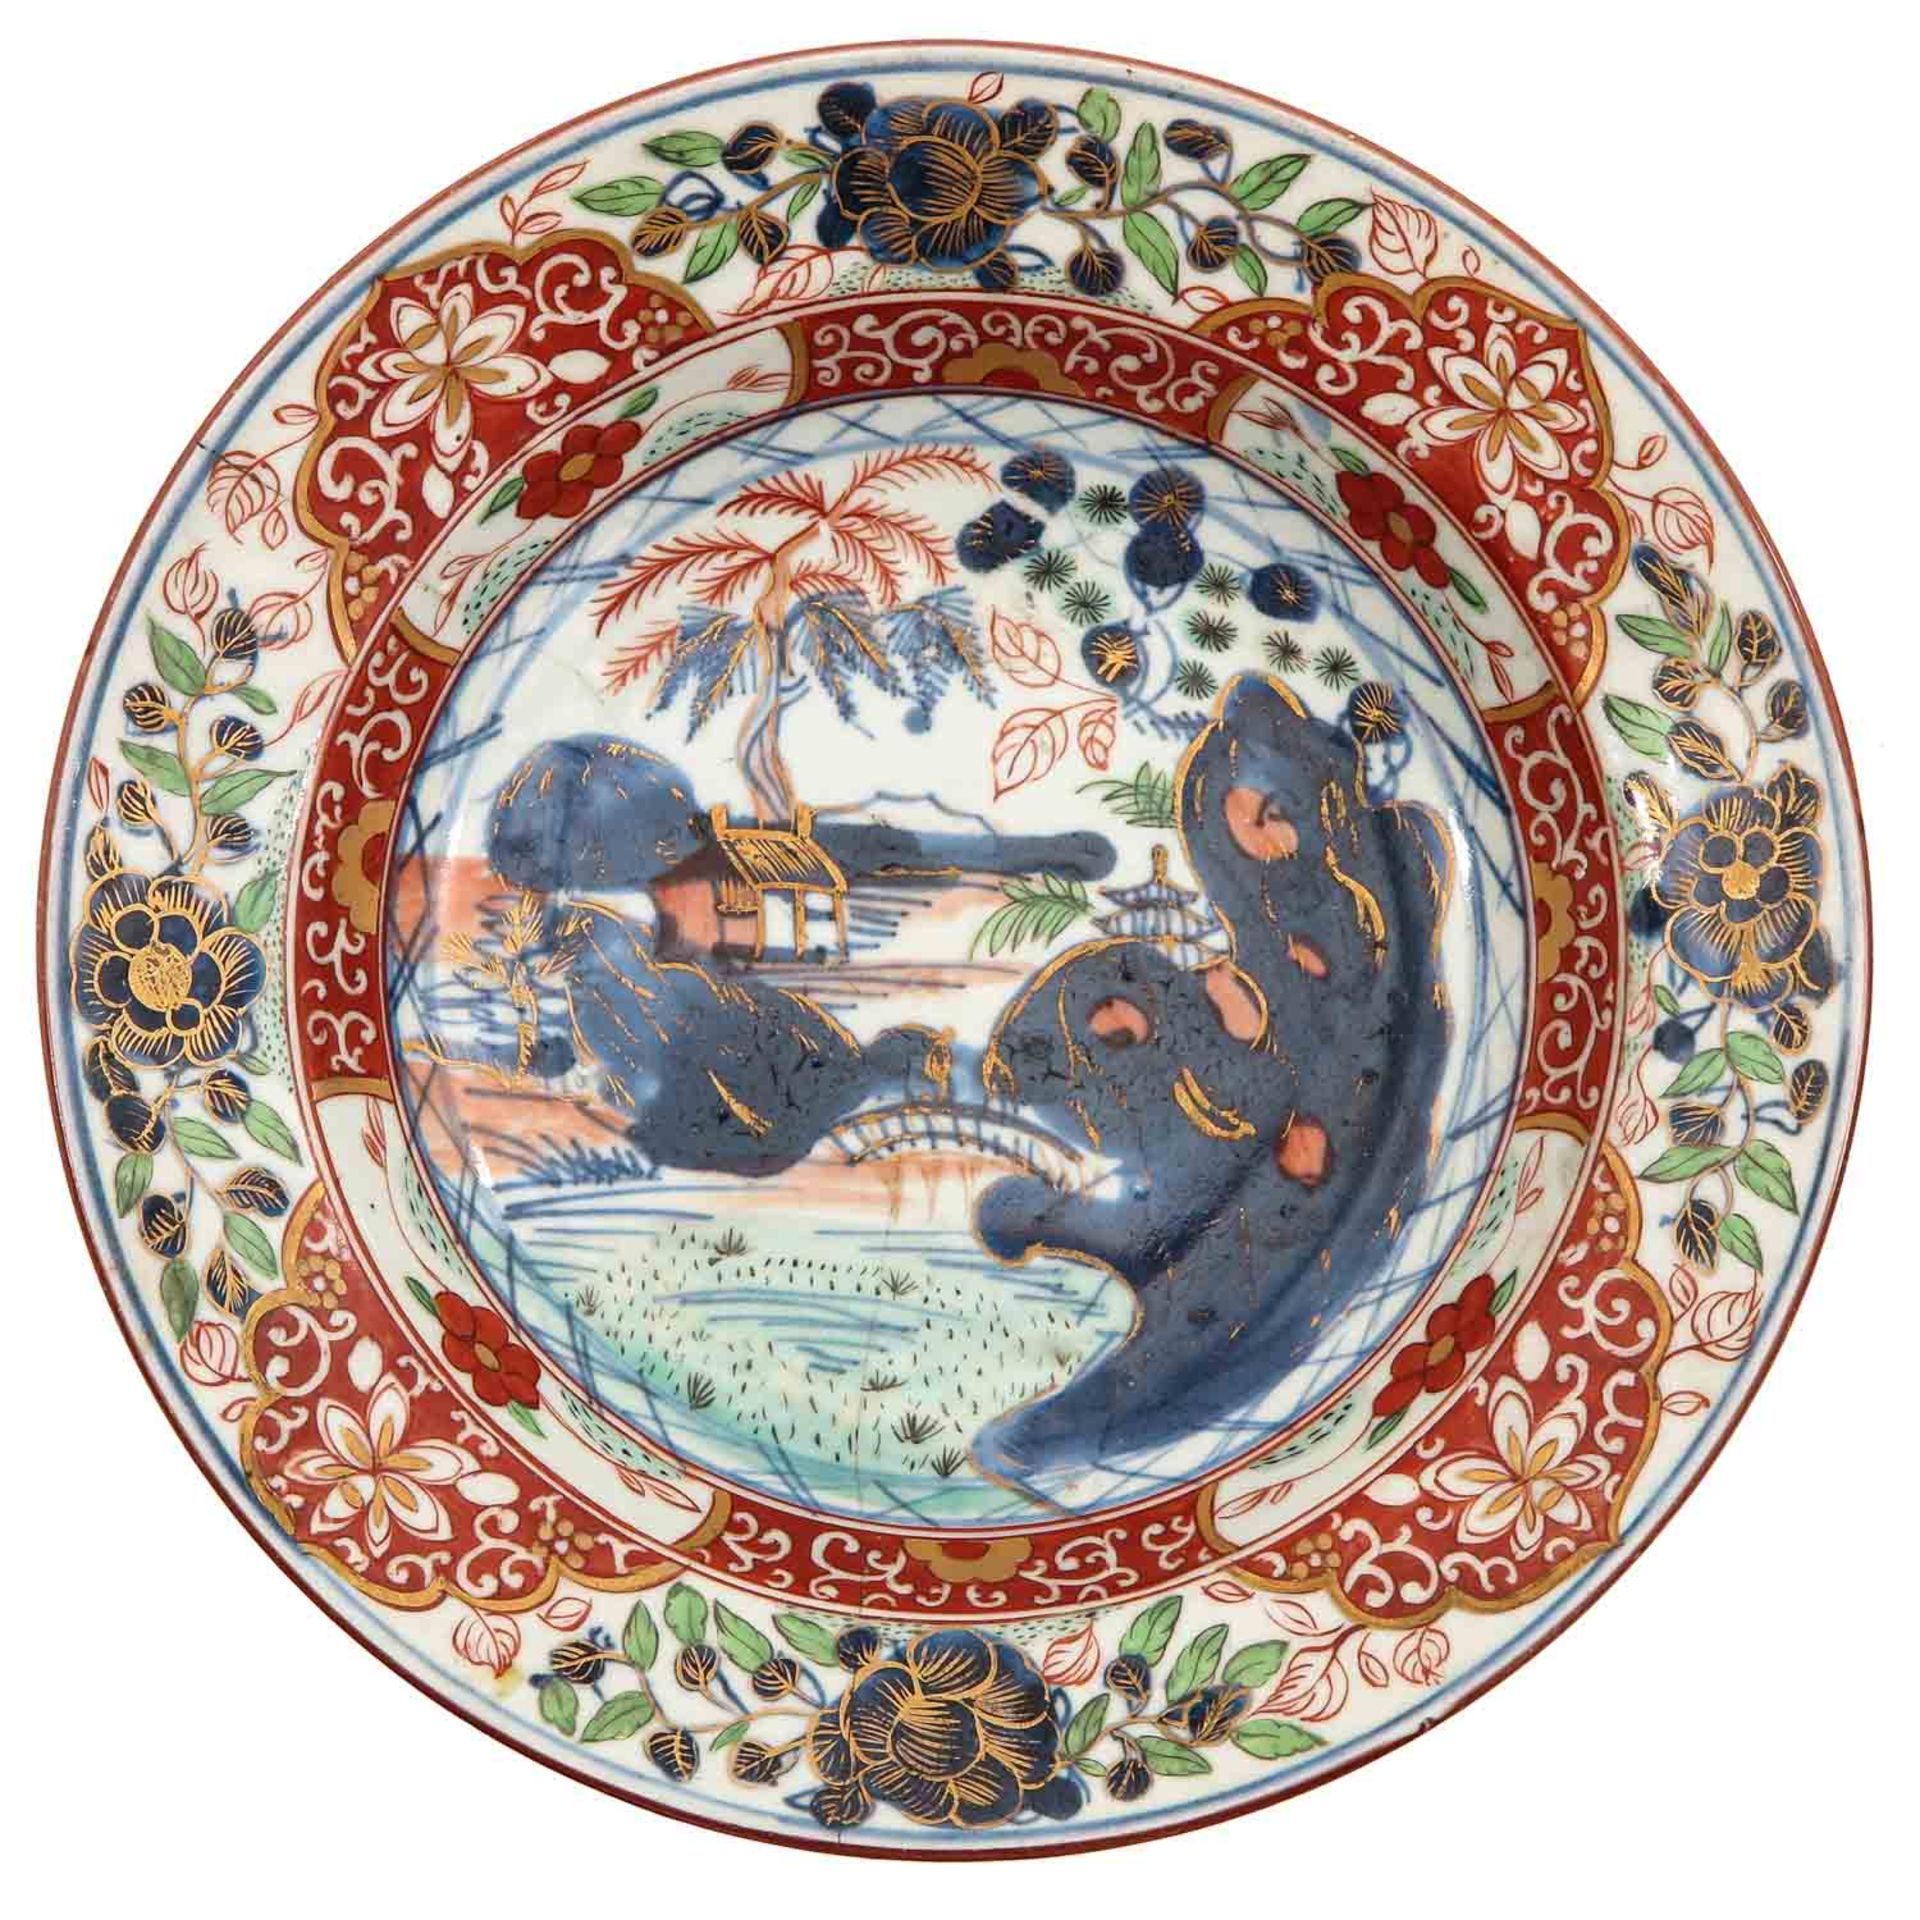 A Series of 3 Polychrome Decor Plates - Image 3 of 10